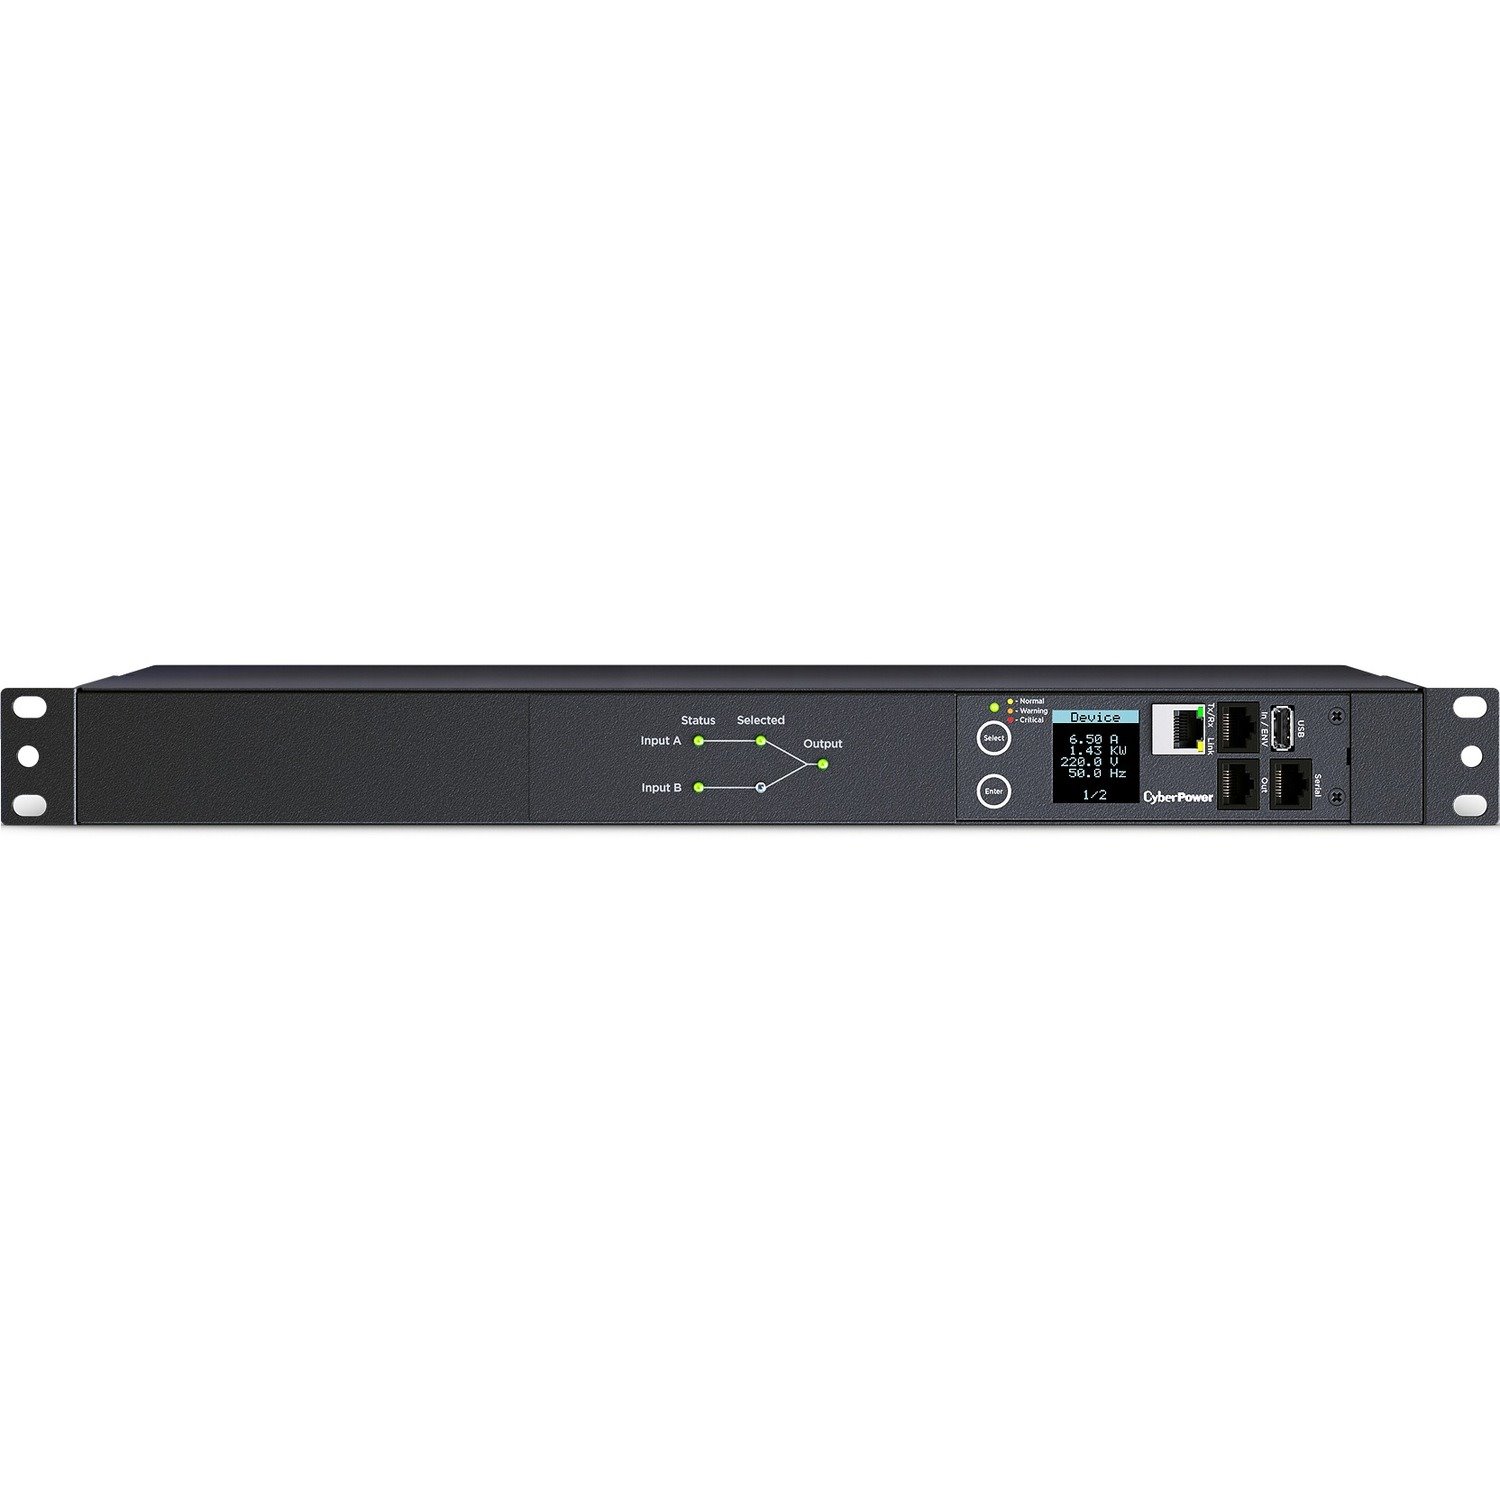 CyberPower Switched ATS PDU PDU44005 10-Outlets PDU